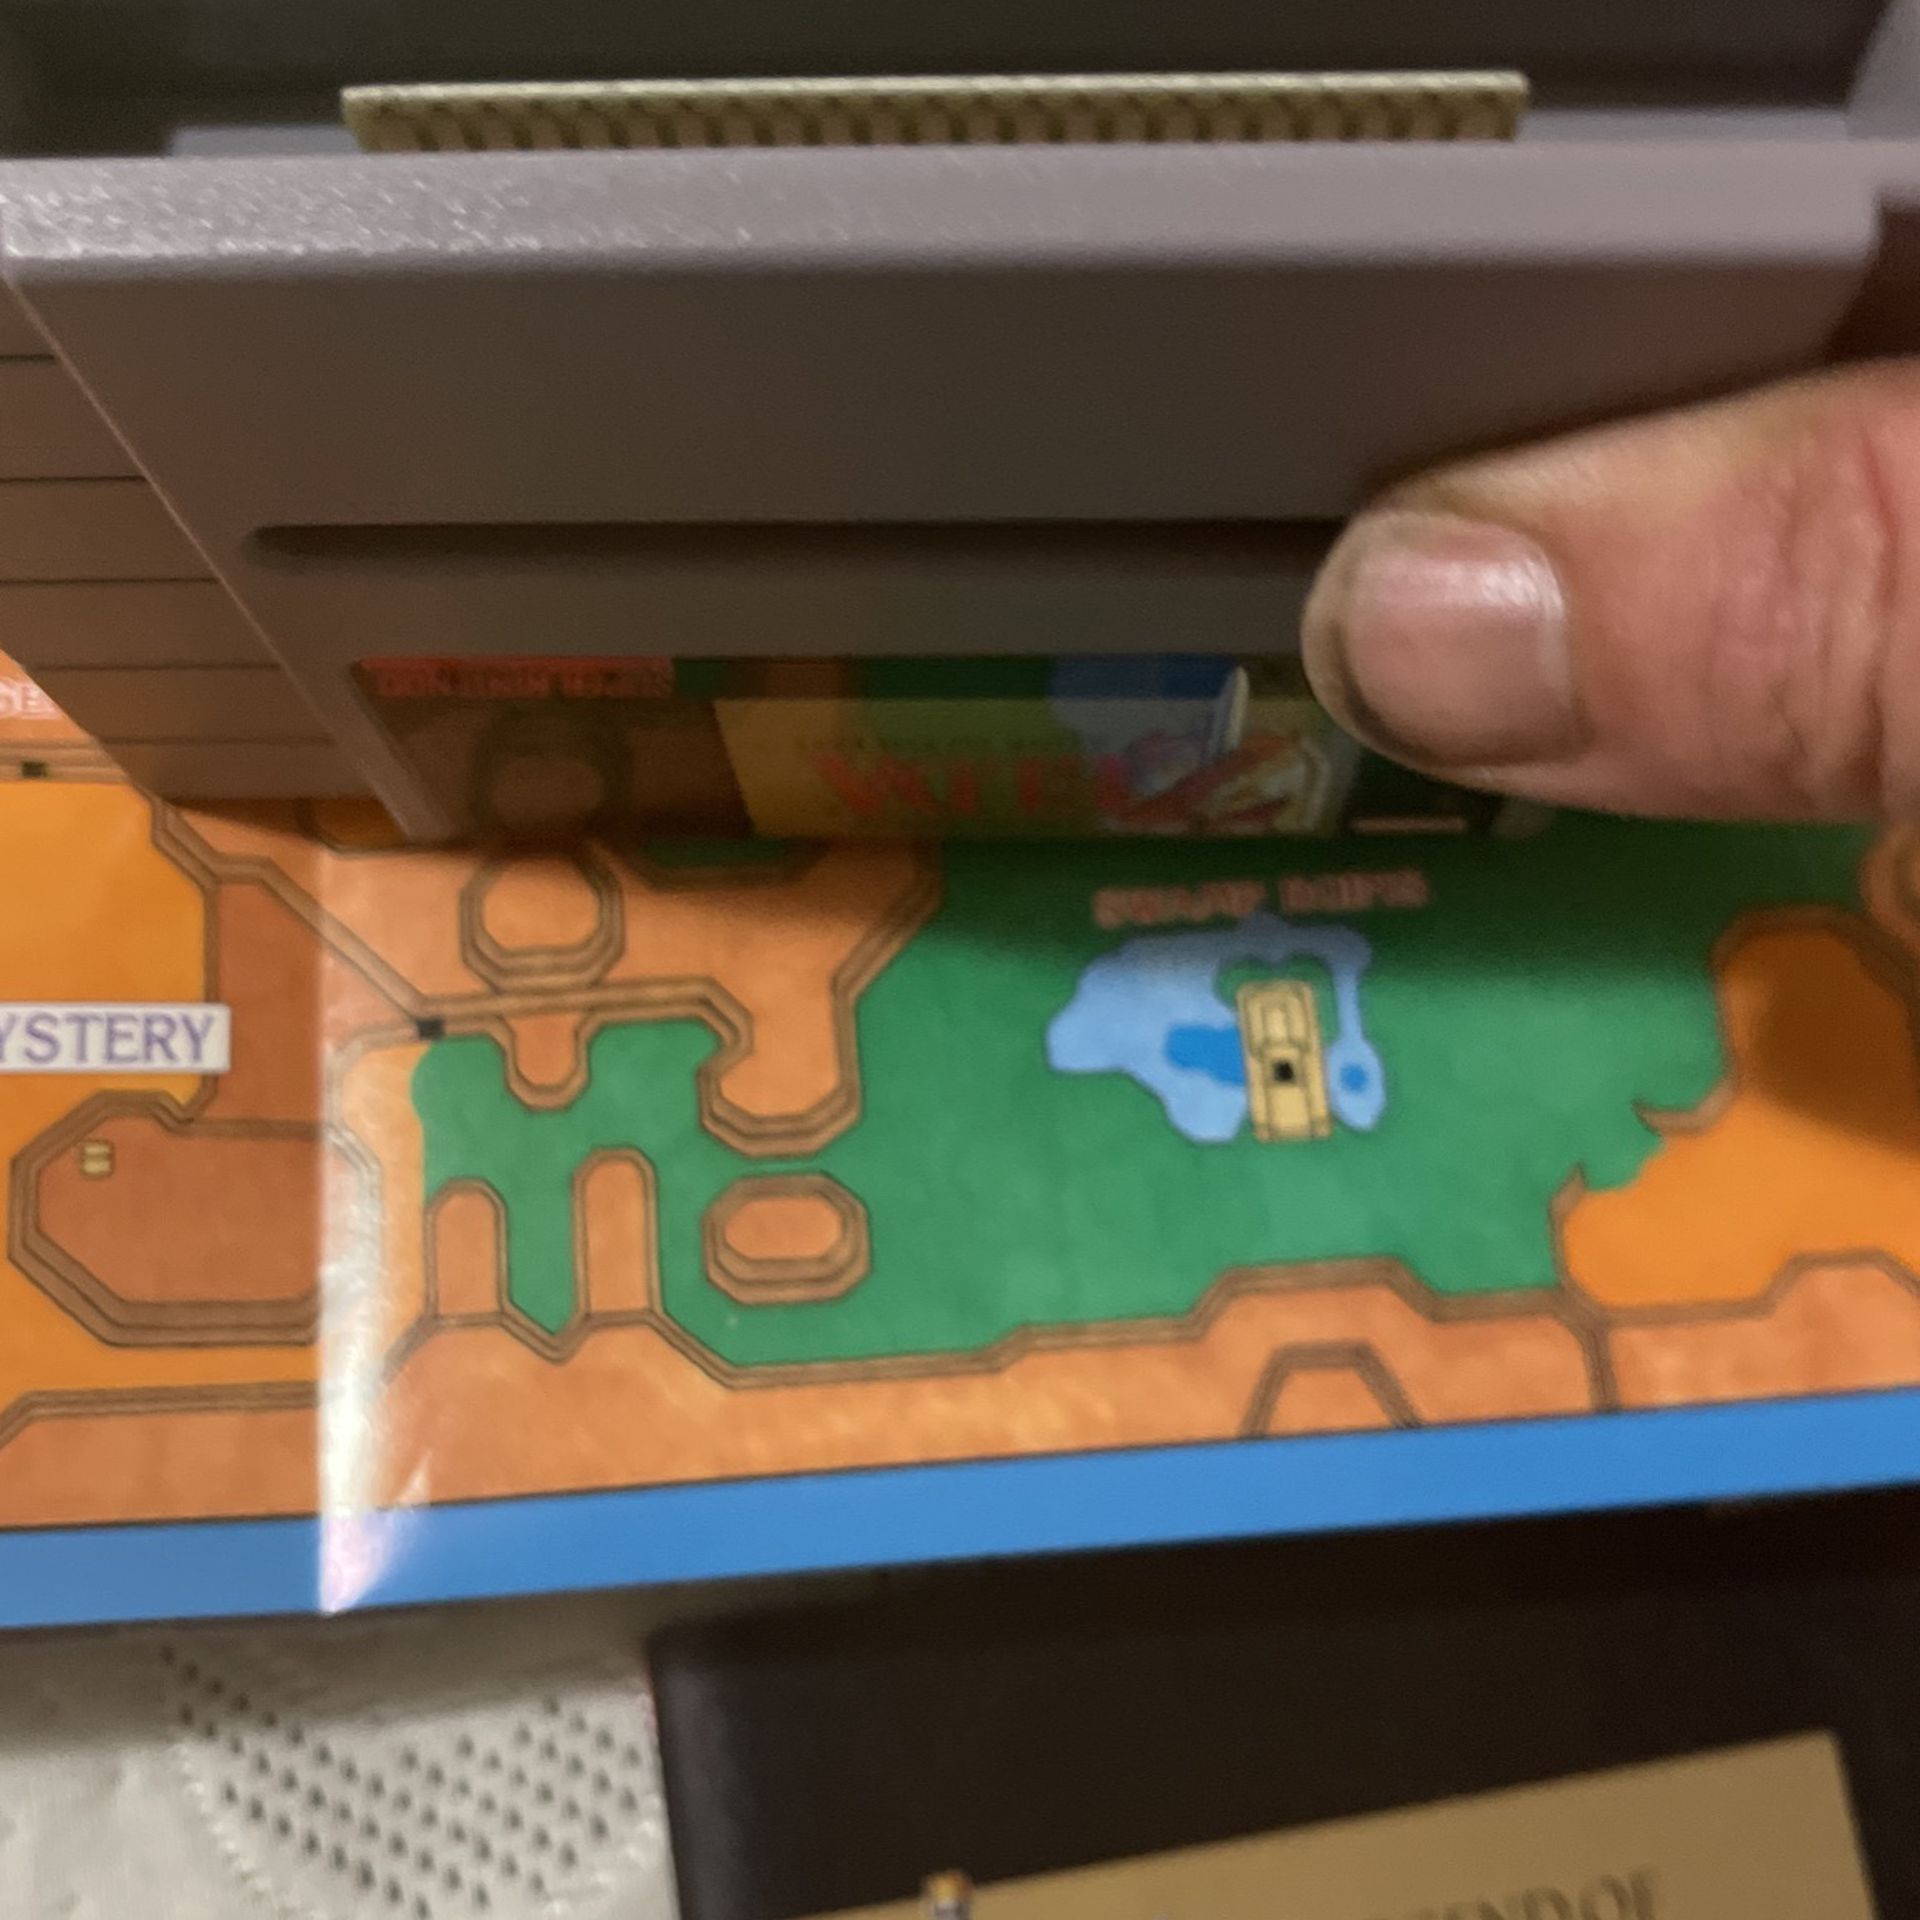 Zelda a Link to the past booklet map, barely ever use, clean as a whistle tested and works perfect